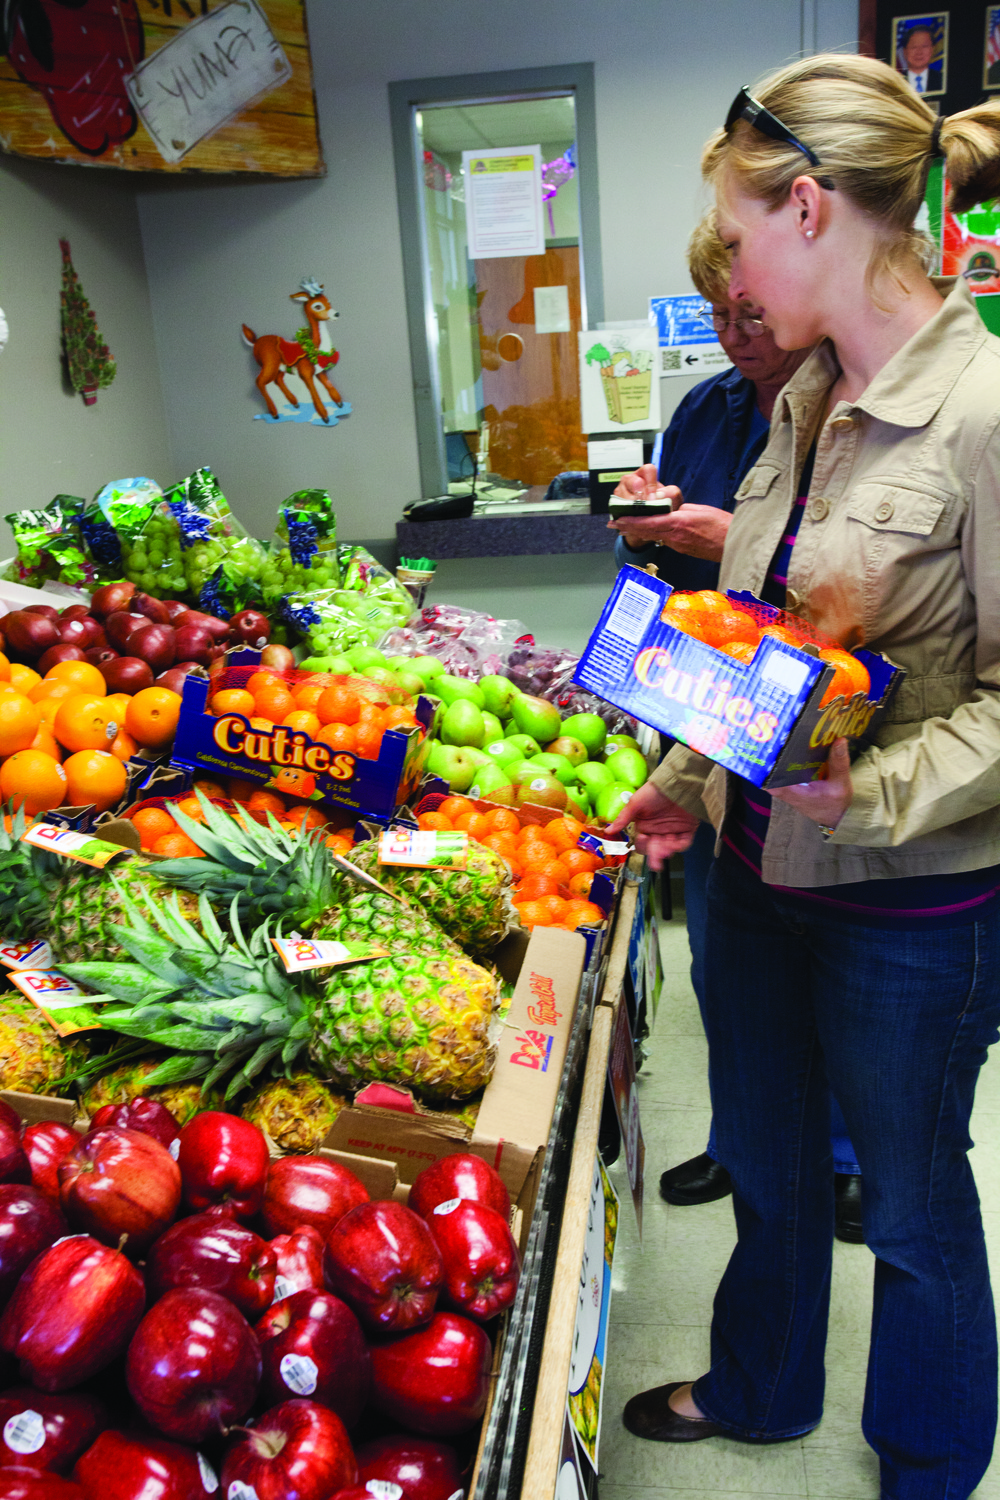 Healthy ways of living brought to you by MCAS Yuma commissary